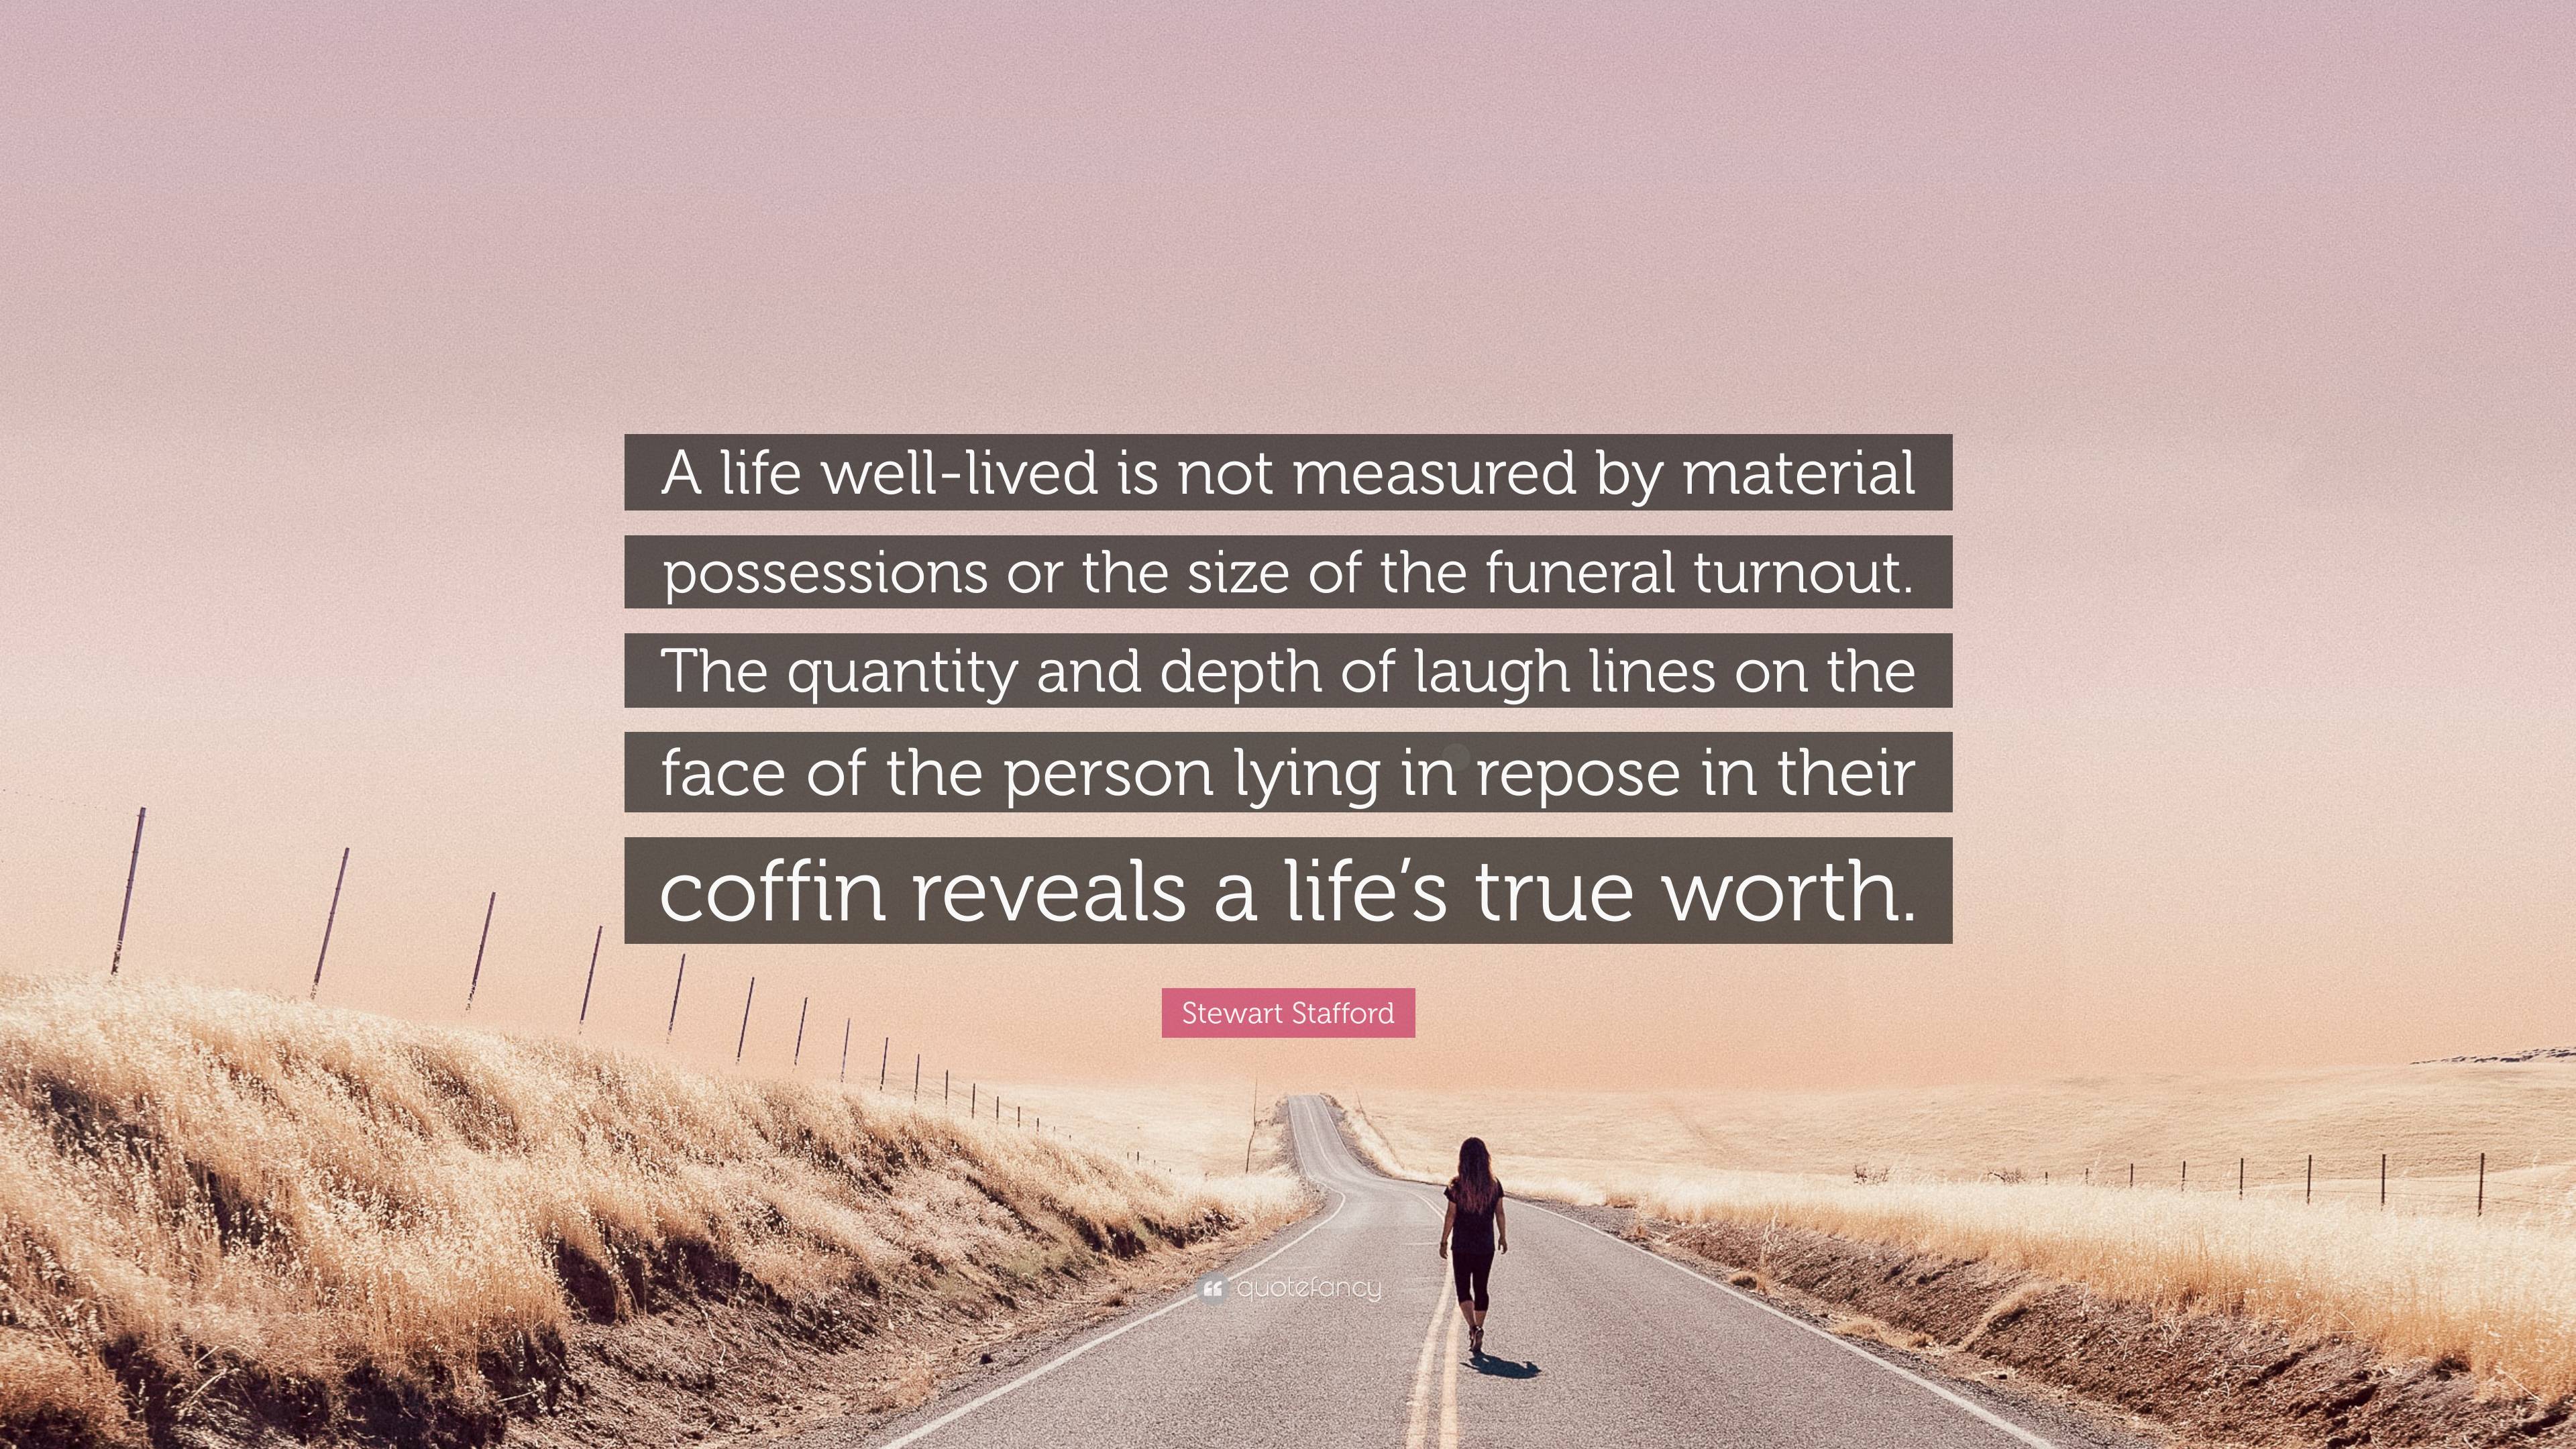 https://quotefancy.com/media/wallpaper/3840x2160/7454261-Stewart-Stafford-Quote-A-life-well-lived-is-not-measured-by.jpg